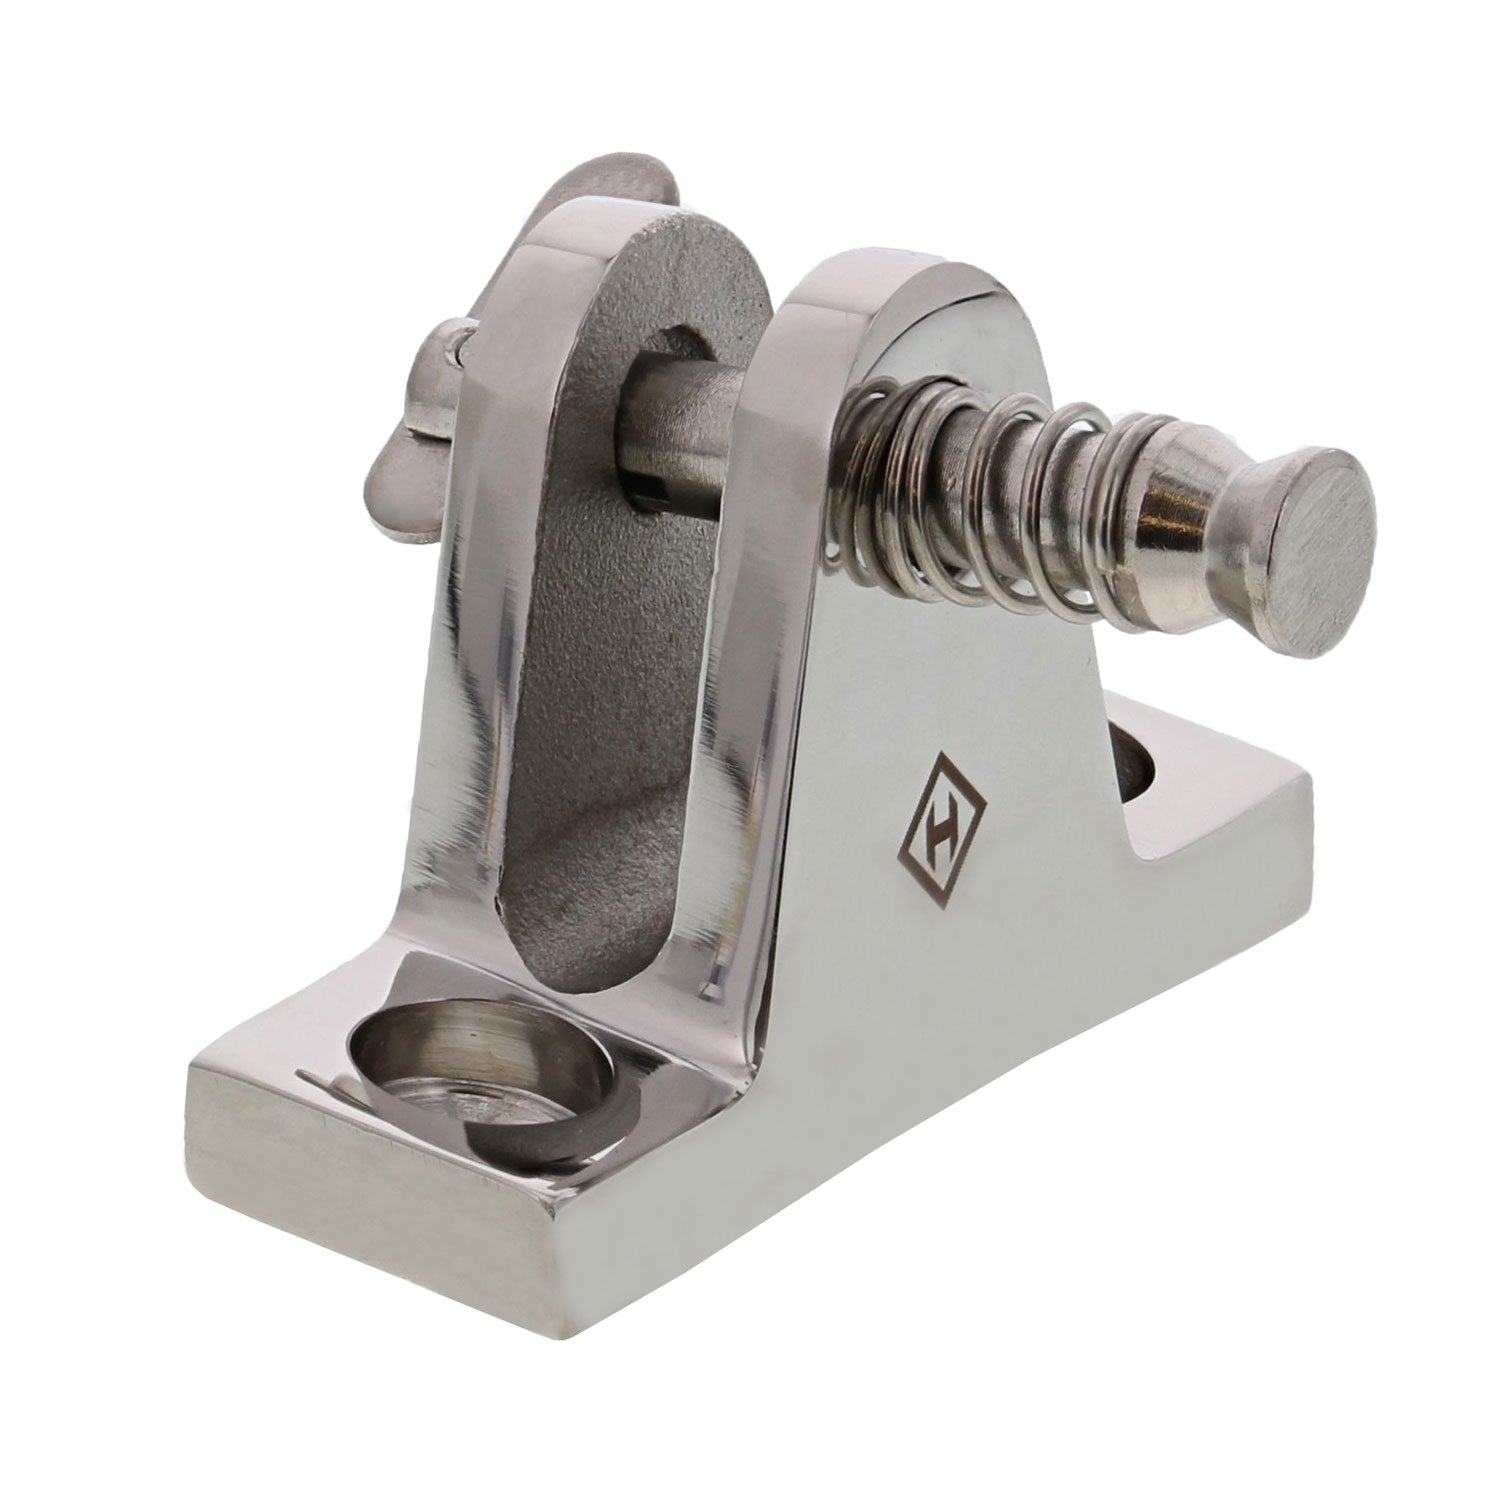 80 Degree Stainless Steel Deck Hinge, Removable Pin